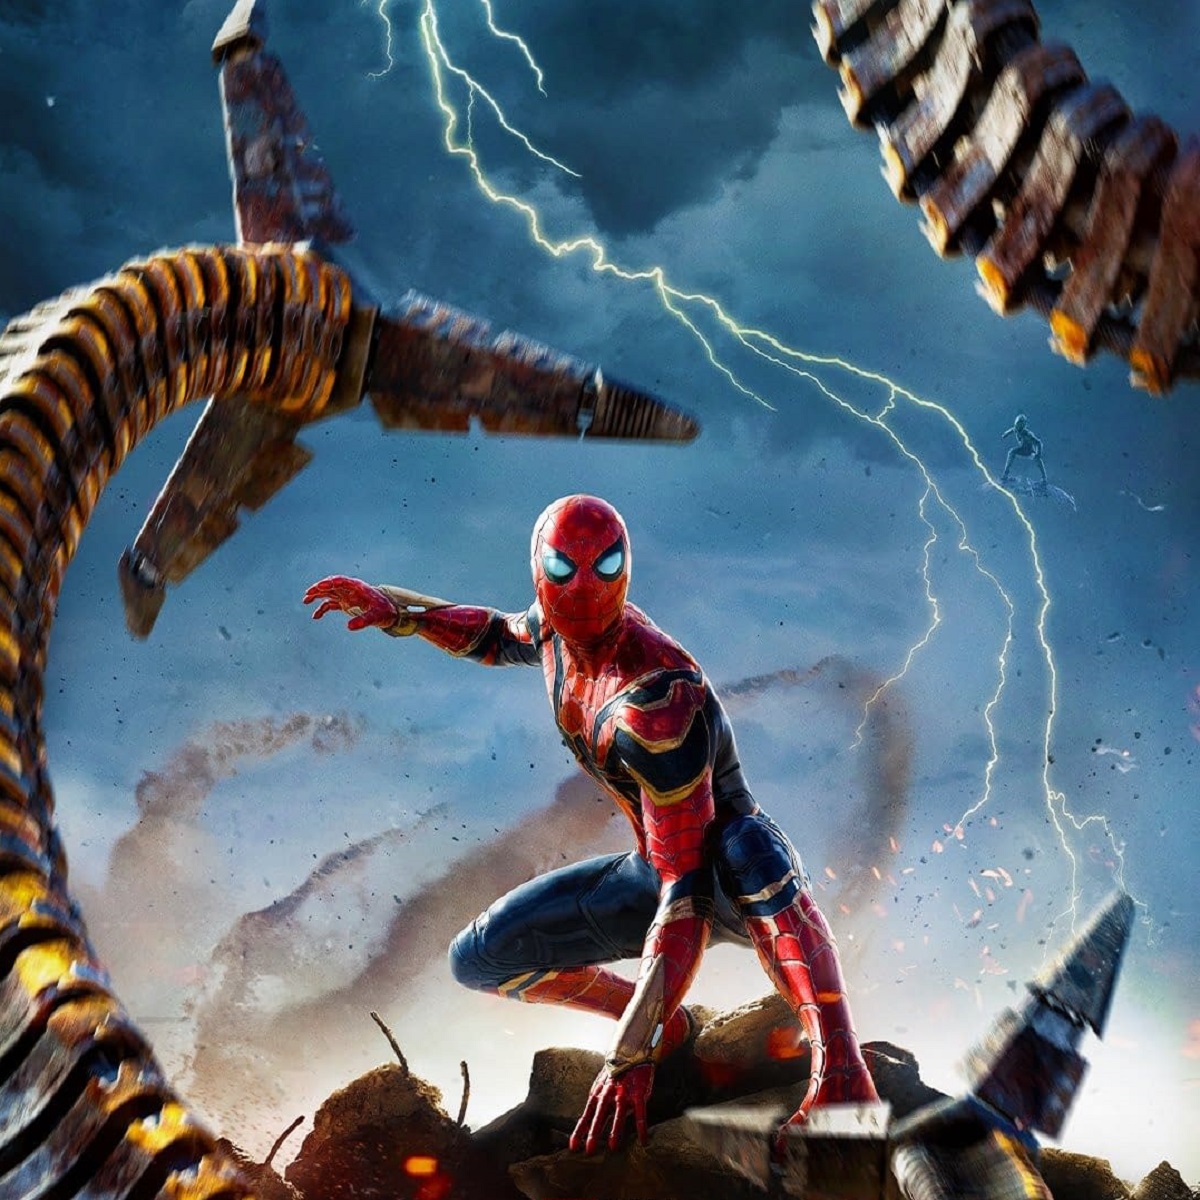 Box Office: Spiderman sells over 1 lakh tickets at PVR in 14 hours – Server down at multiple locations 